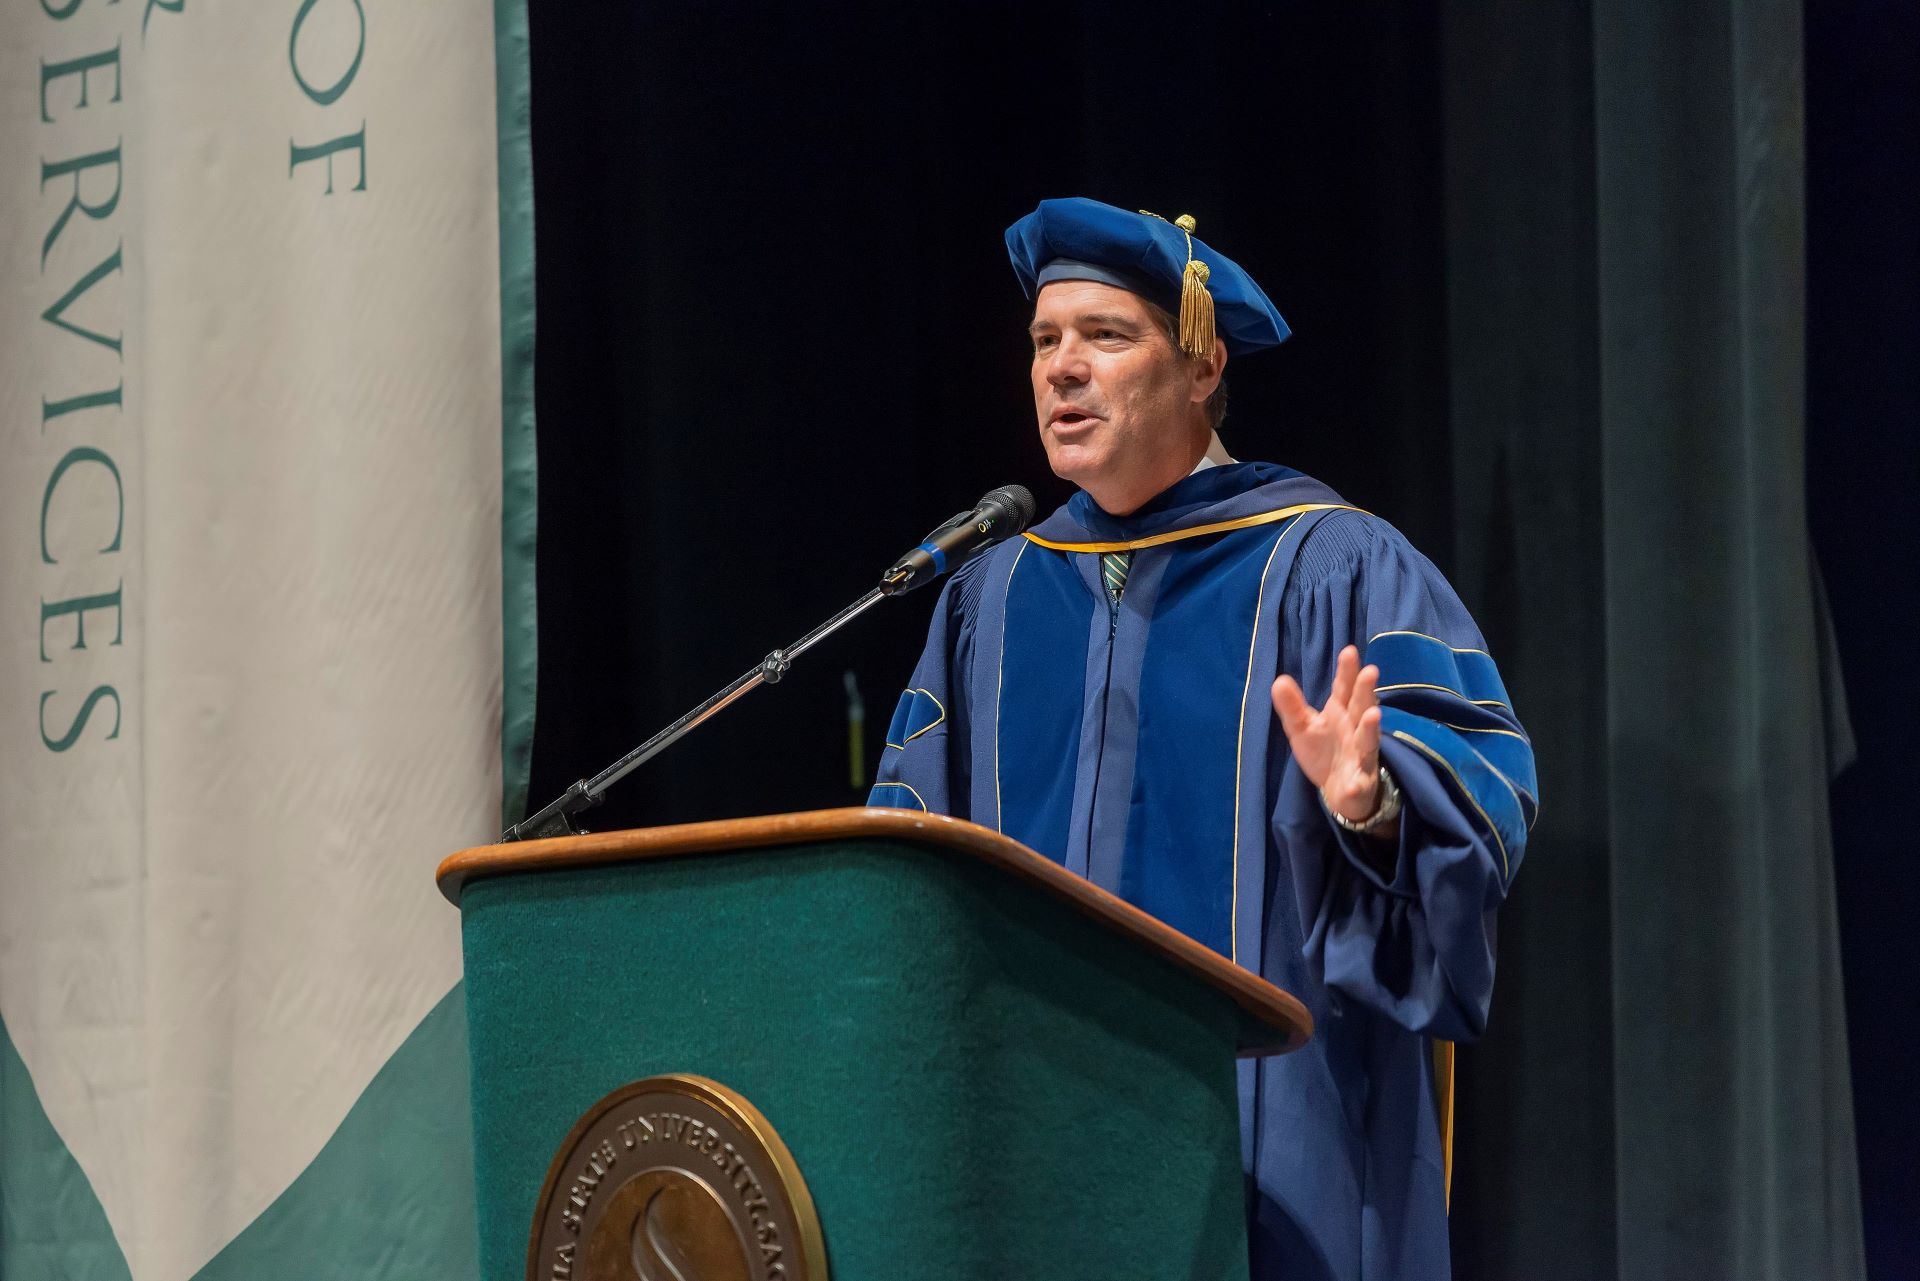 Sac State Provost Steve Perez, who has been appointed interim president of San Jose State.